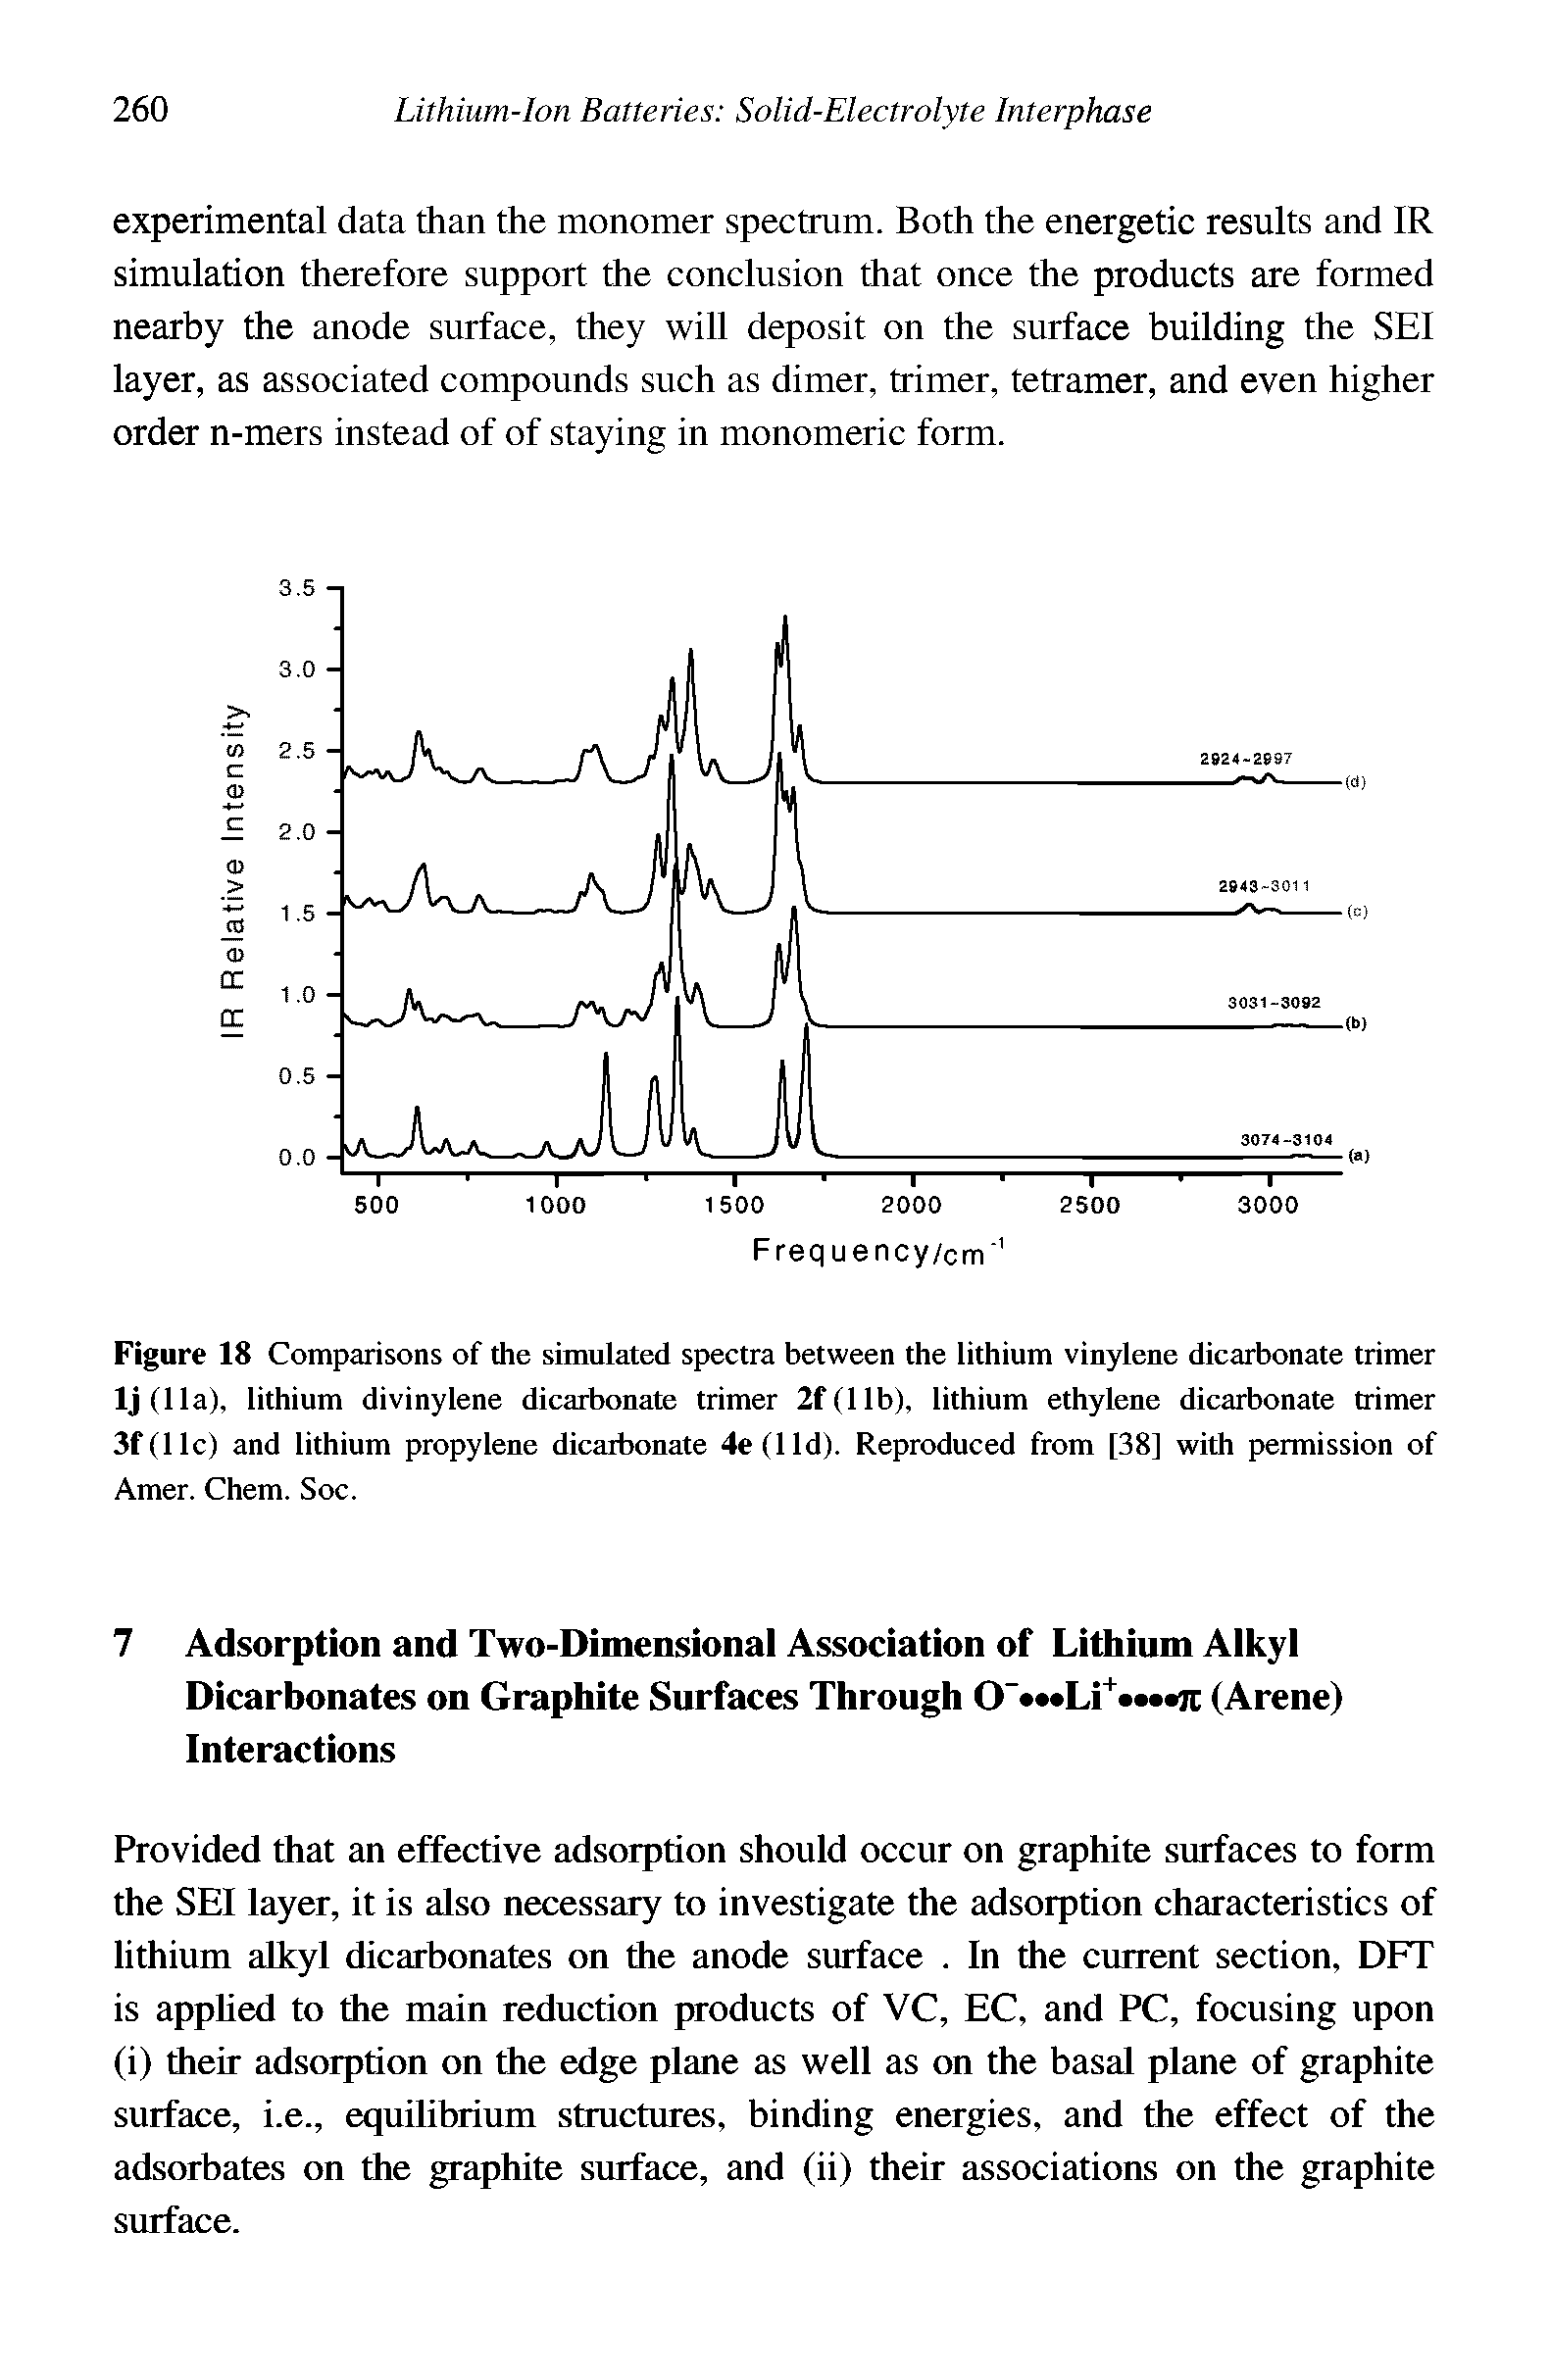 Figure 18 Comparisons of the simulated spectra between the lithium vinylene dicarbonate trimer Ij(lla), lithium divinylene dicarbonate trimer 2f(llb), lithium ethylene dicarbonate trimer 3f(llc) and lithium propylene dicaibonate 4e(lld). Reproduced from [38] with permission of Amer. Chem. Soc.